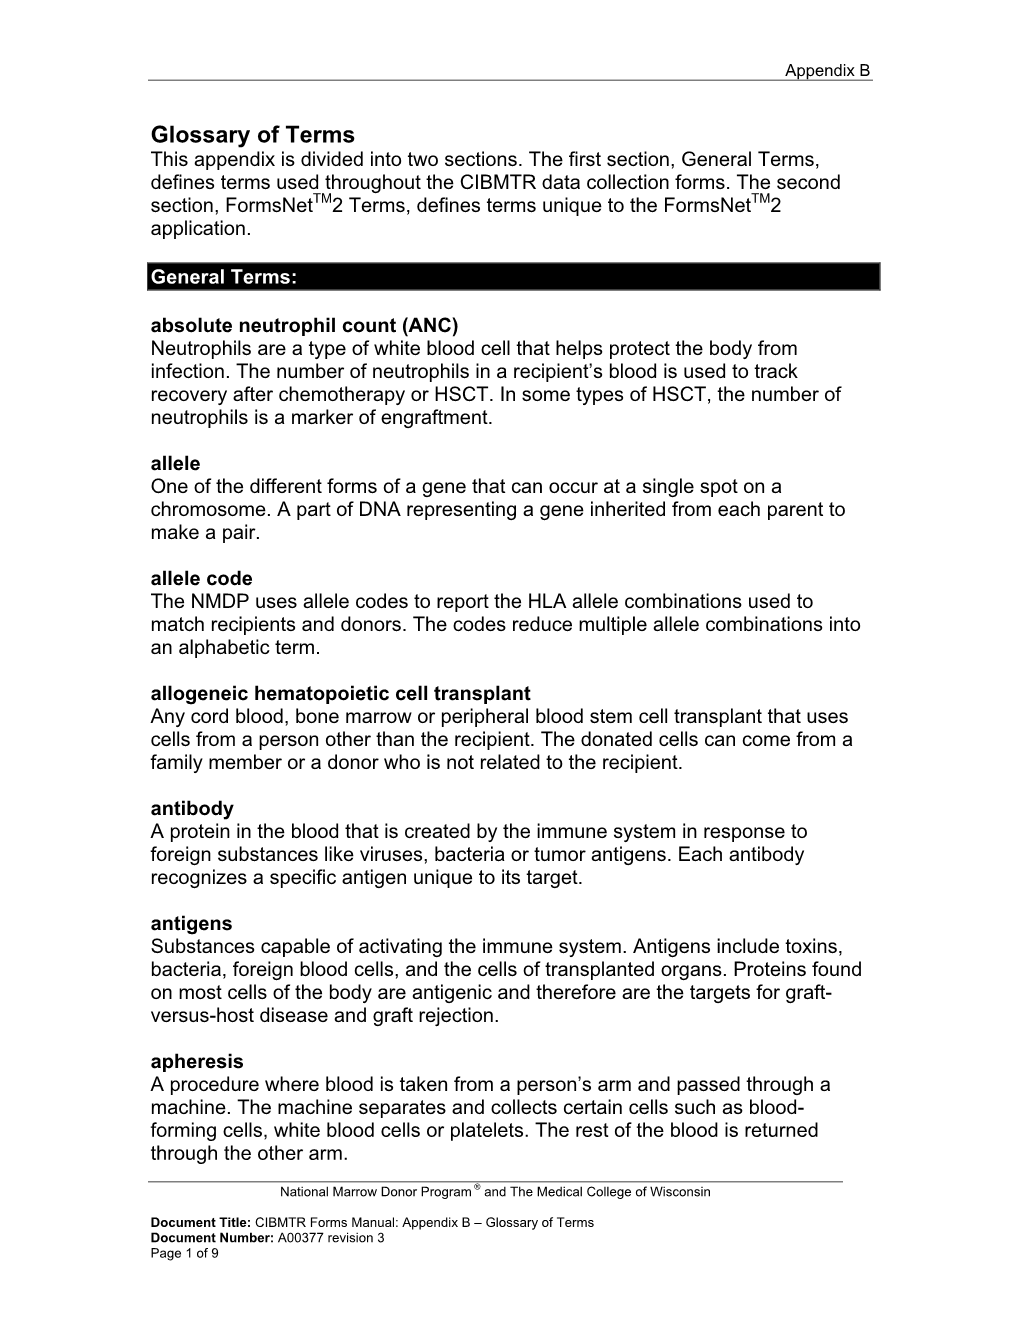 Appendix B – Glossary of Terms Document Number: A00377 Revision 3 Page 1 of 9 Appendix B